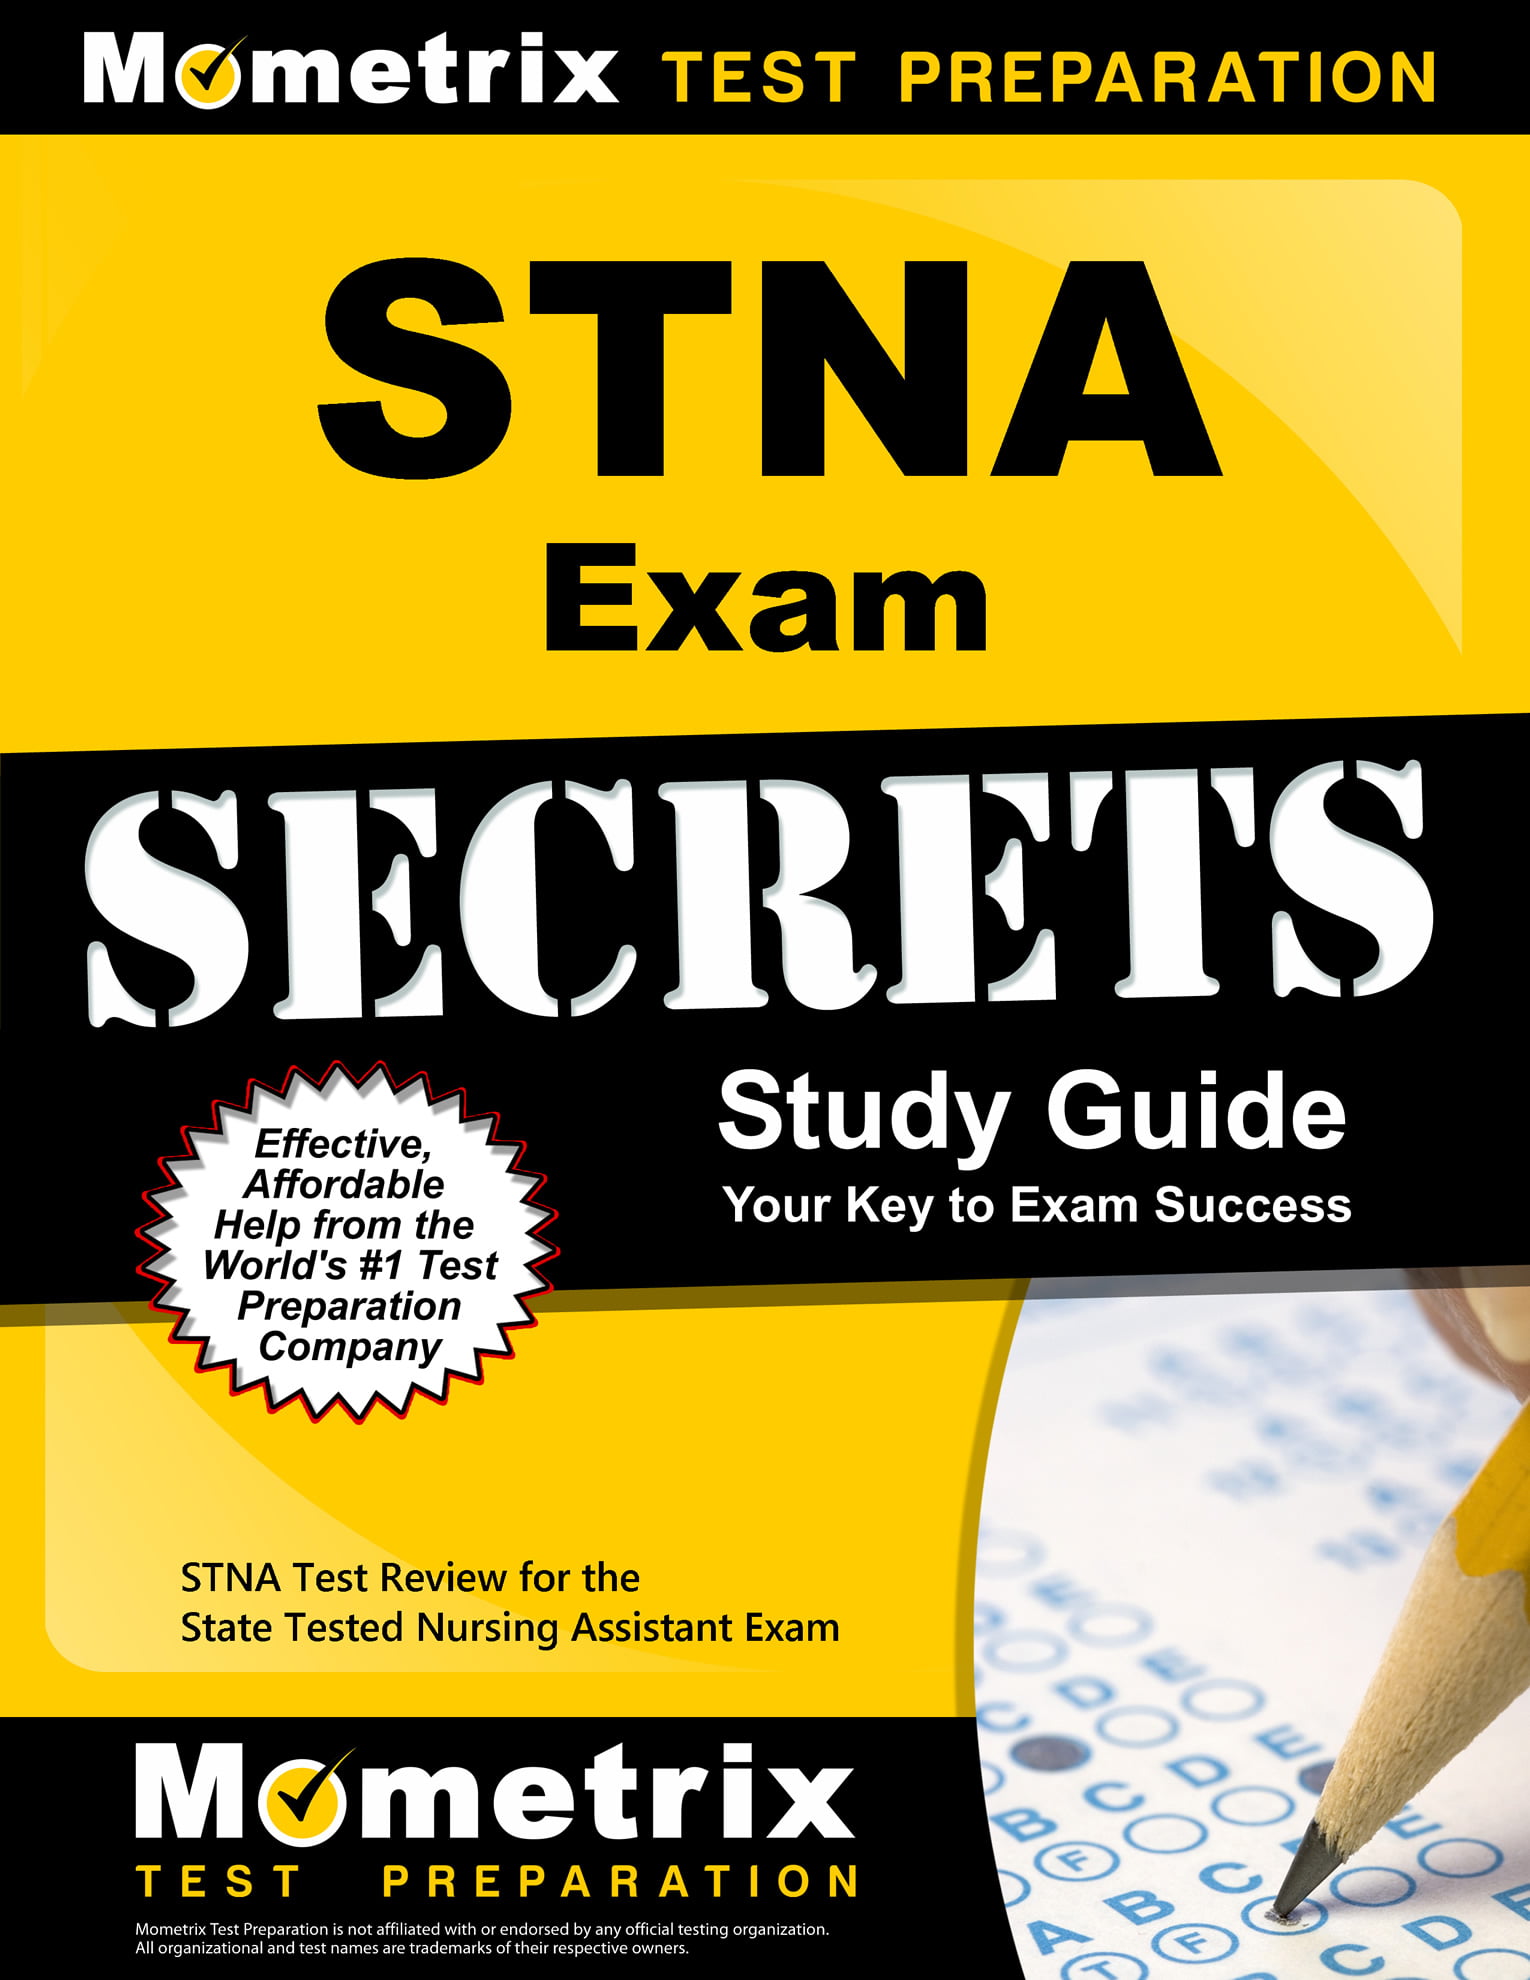 Stna Exam Secrets Study Guide Stna Test Review for the State Tested